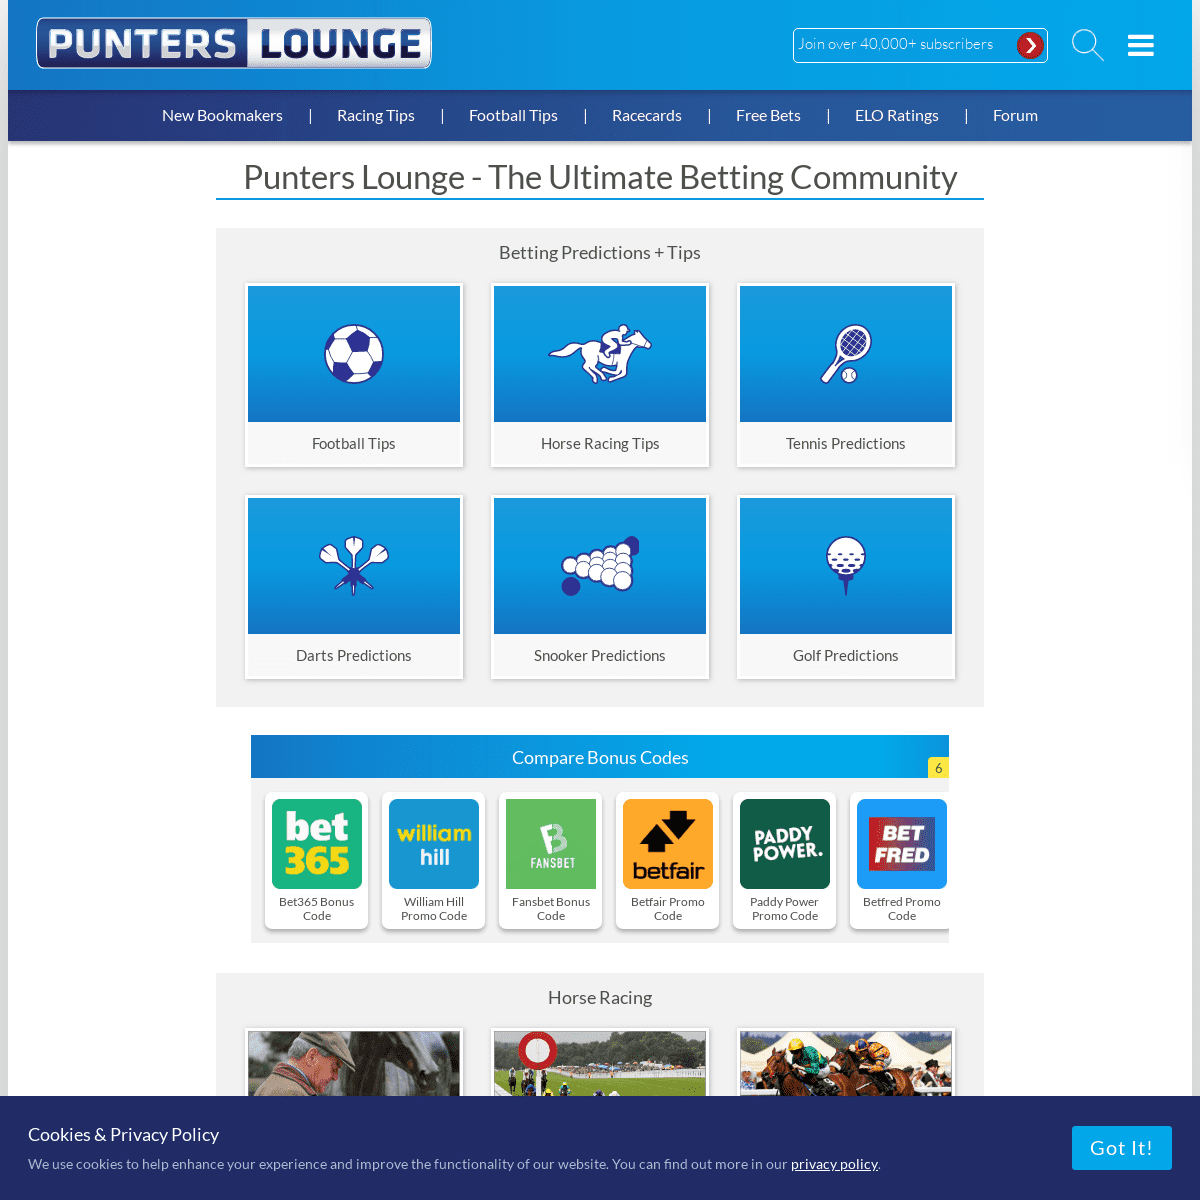 Punters Lounge: The Ultimate Betting Community (Over 100k Members)